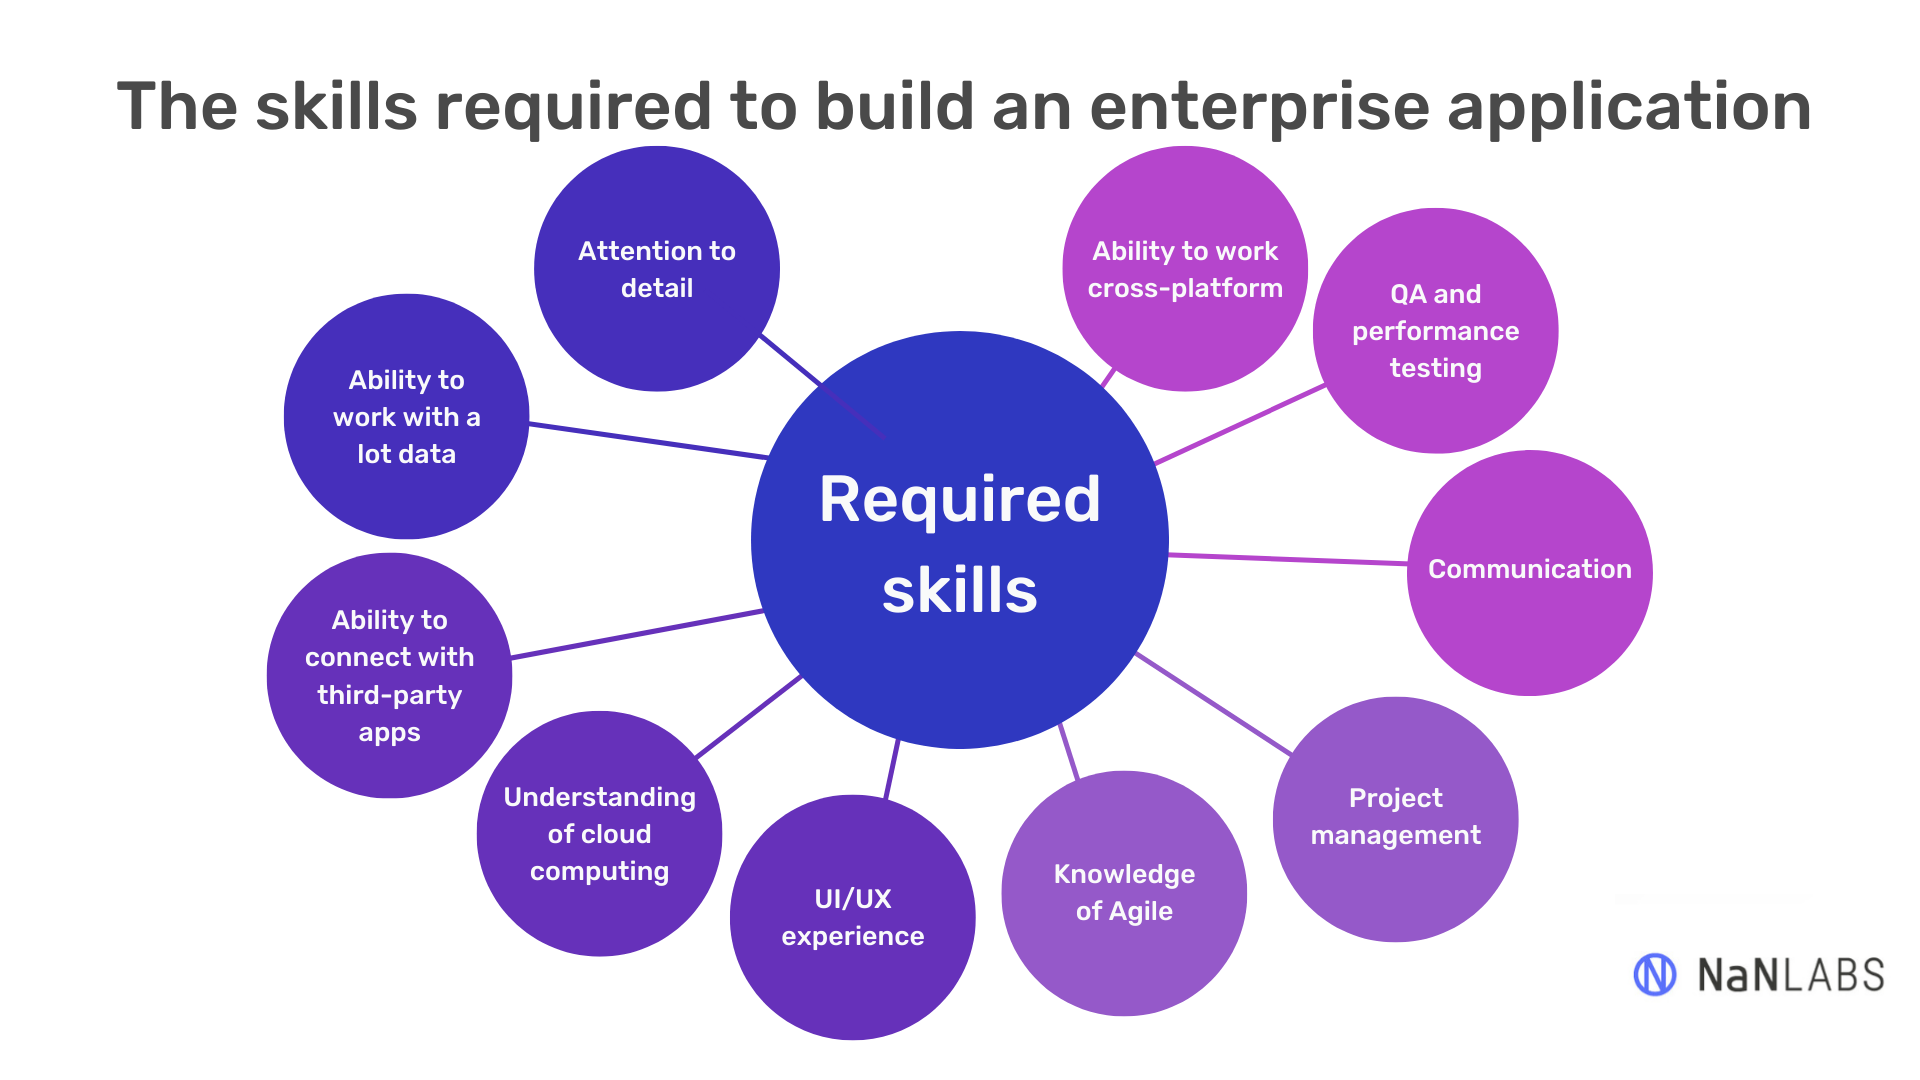 The skills required to build an enterprise application